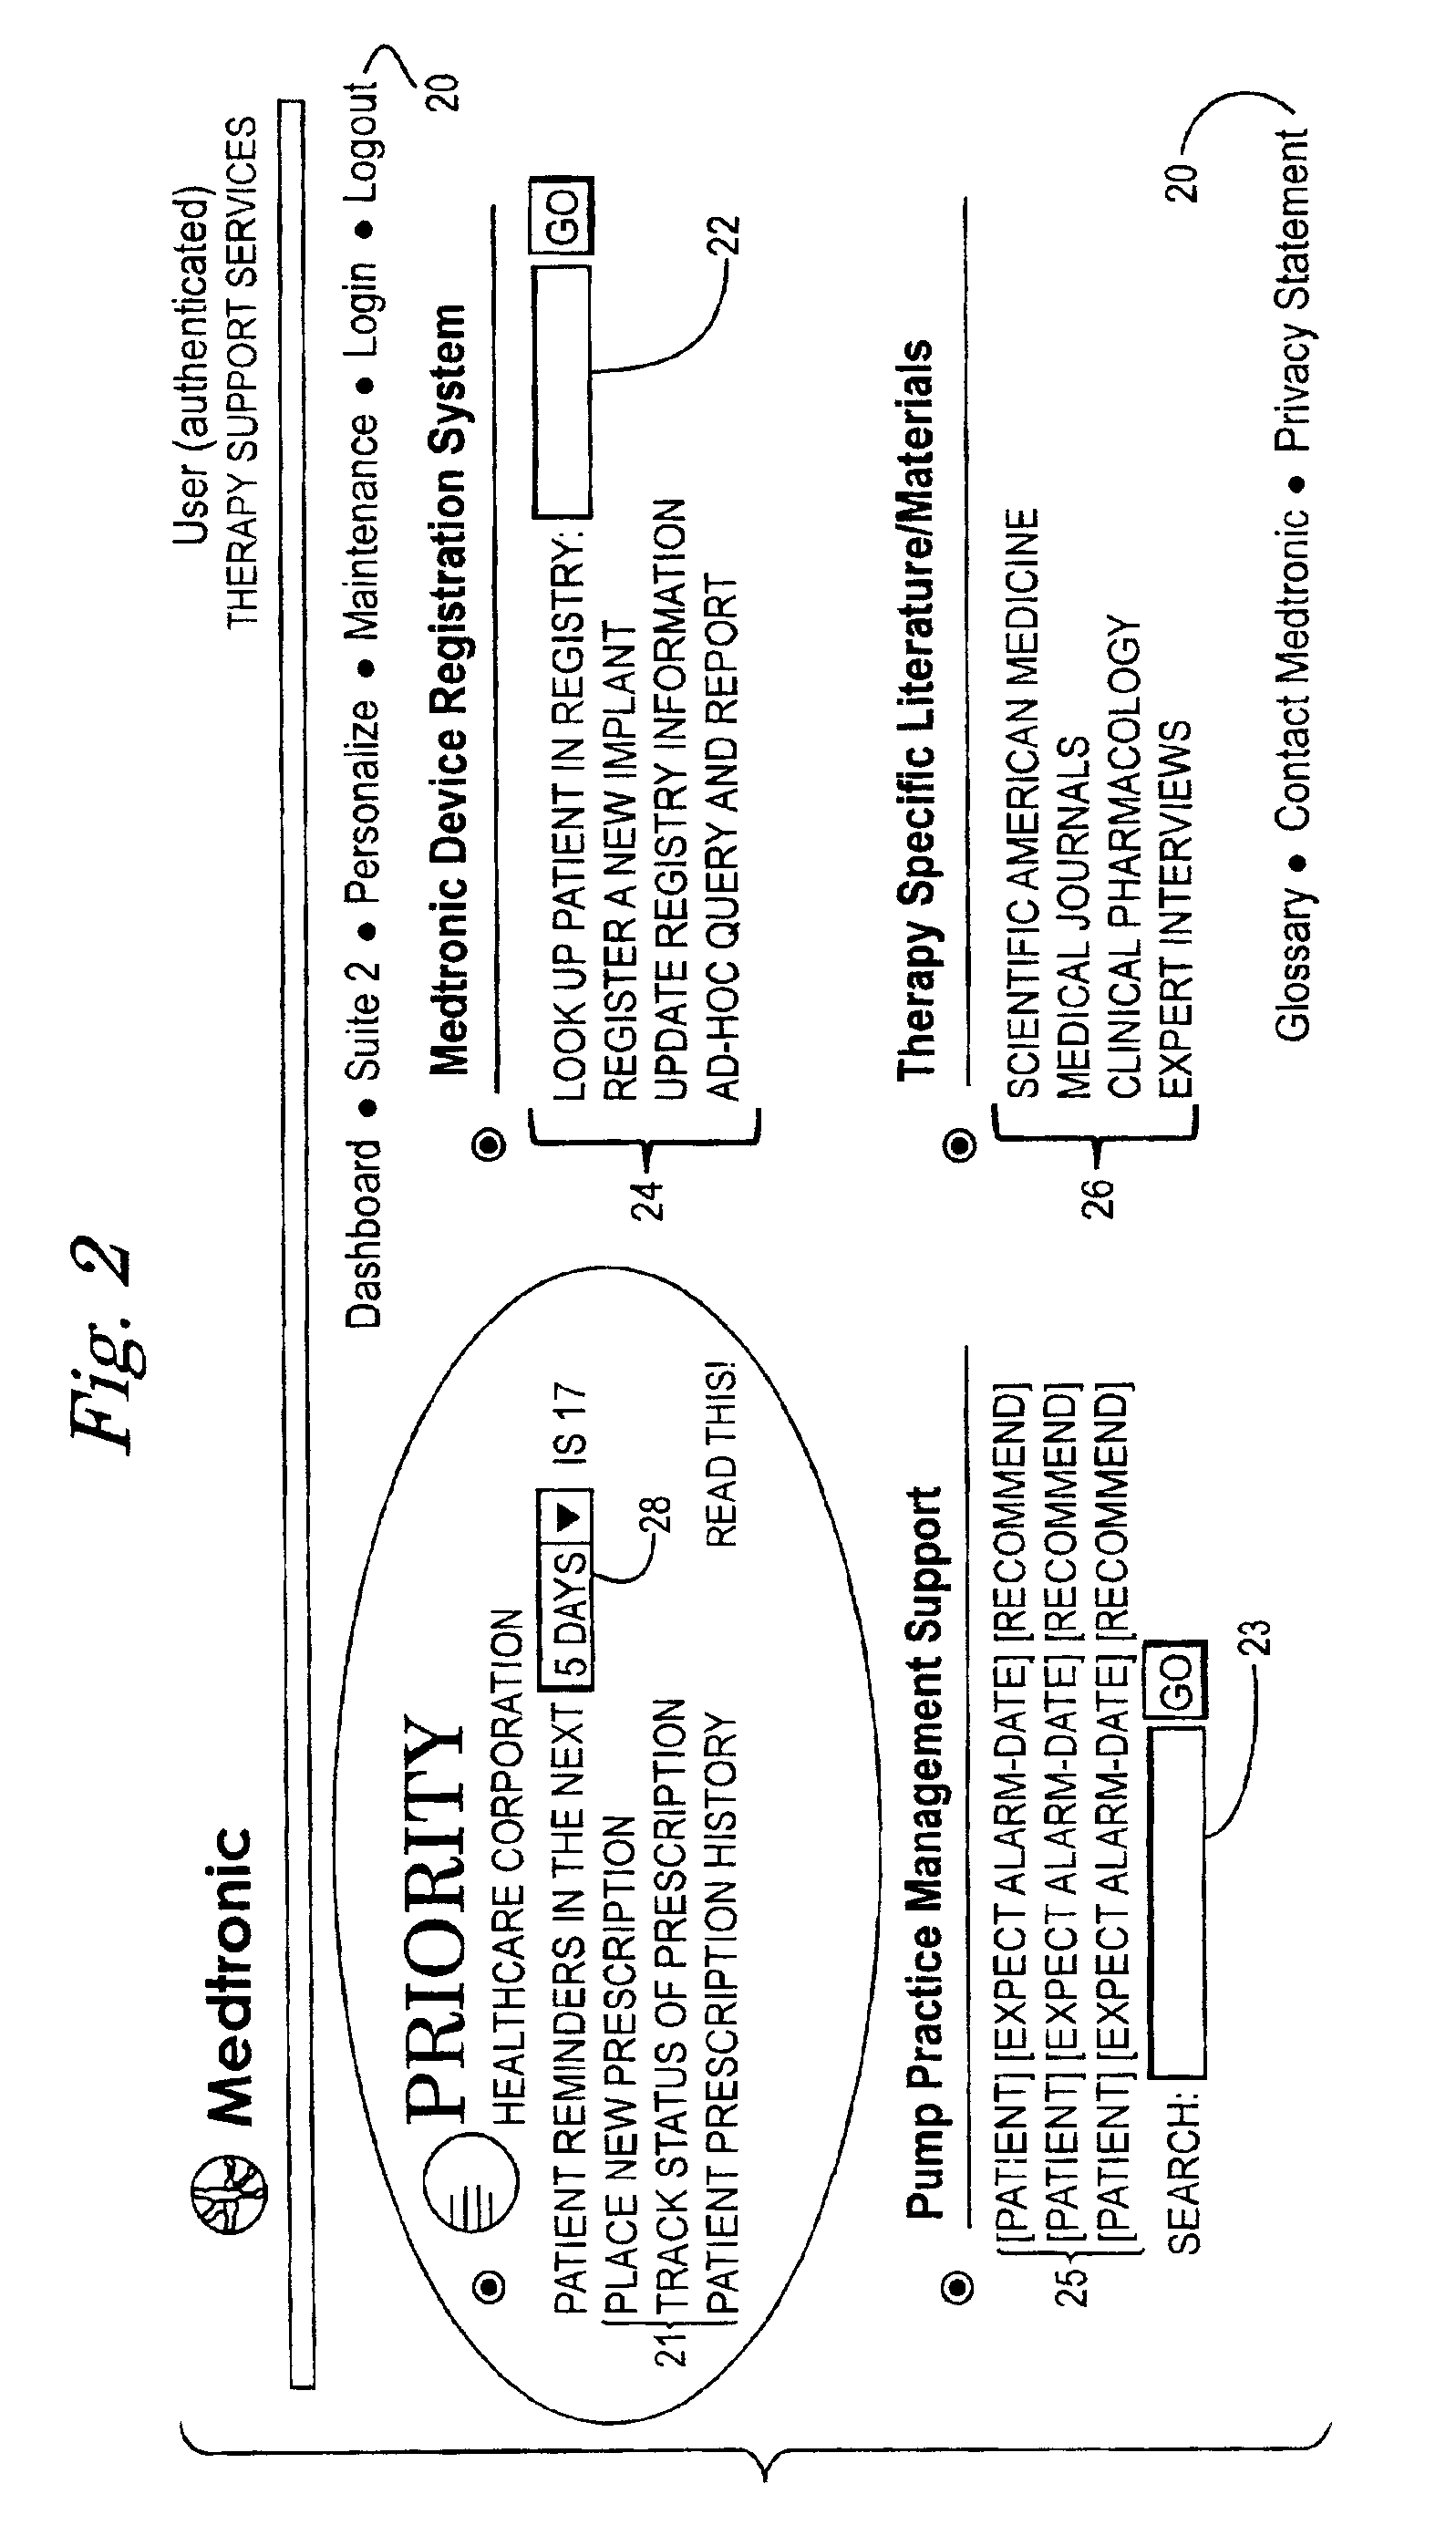 Implantable therapeutic substance infusion device configuration system